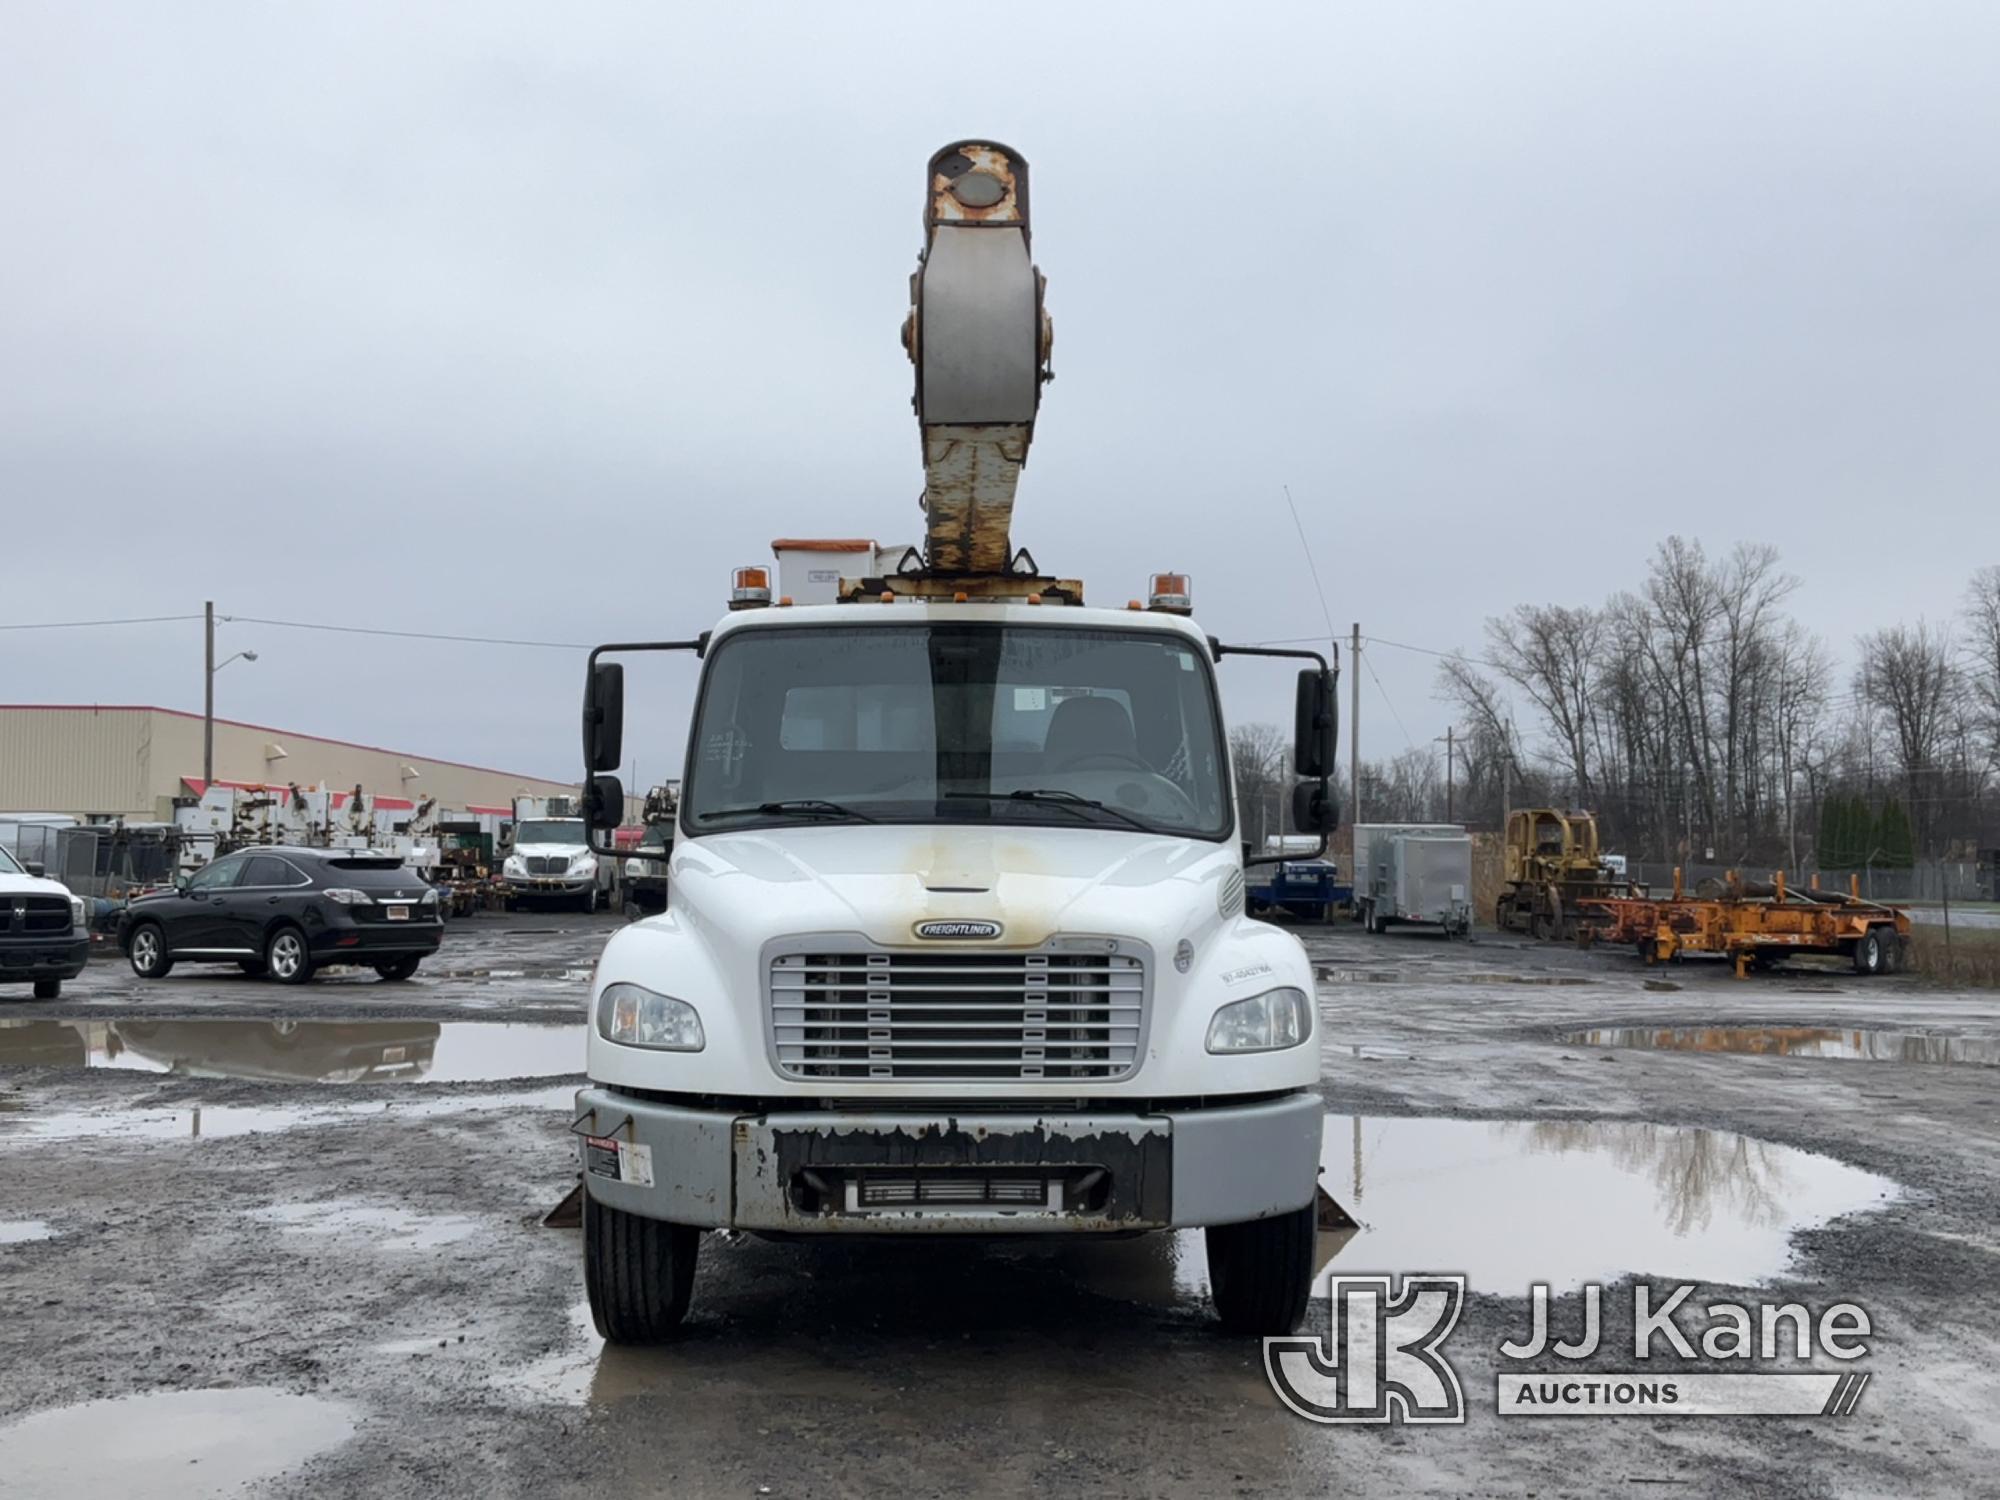 (Rome, NY) Altec AN55E, Material Handling Bucket Truck rear mounted on 2017 Freightliner M2 106 Util